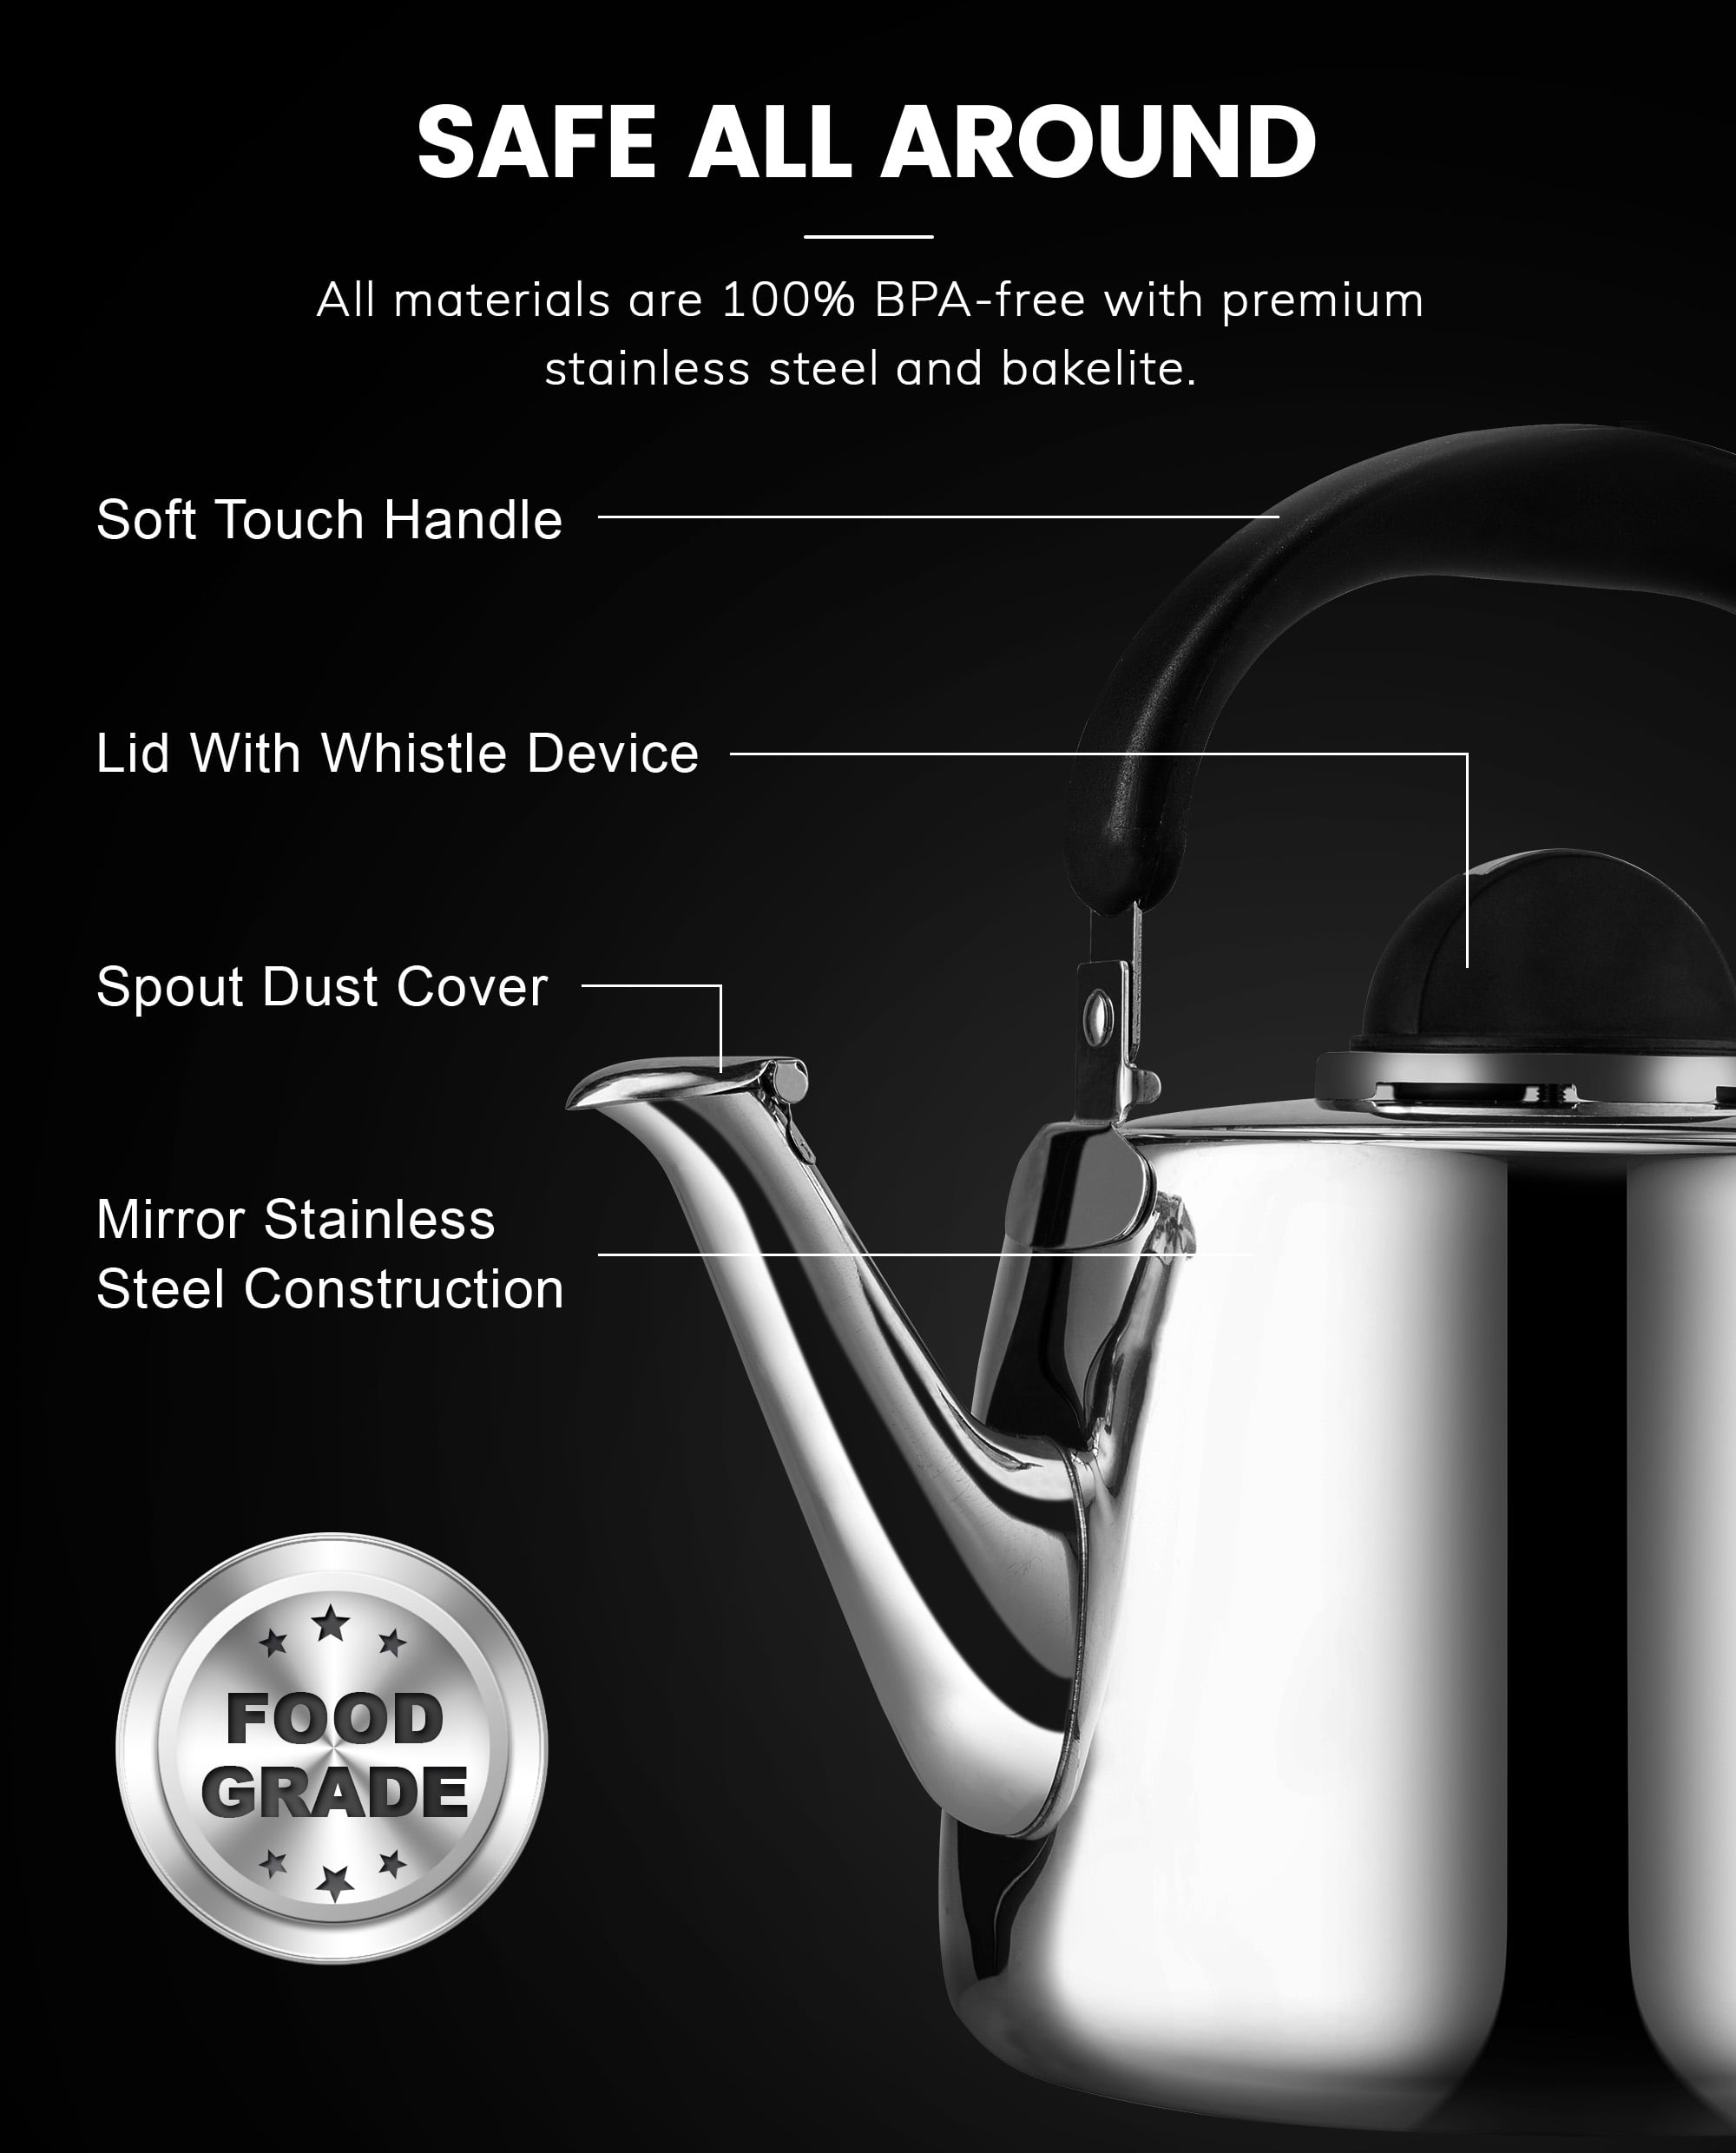 Tea Kettle for Stovetop, 2.1 Quart Loud Whistle Stovetop Teapots,Food Grade  Stainless Steel Tea kettles for Stove Top with Anti-hot Ergonomic